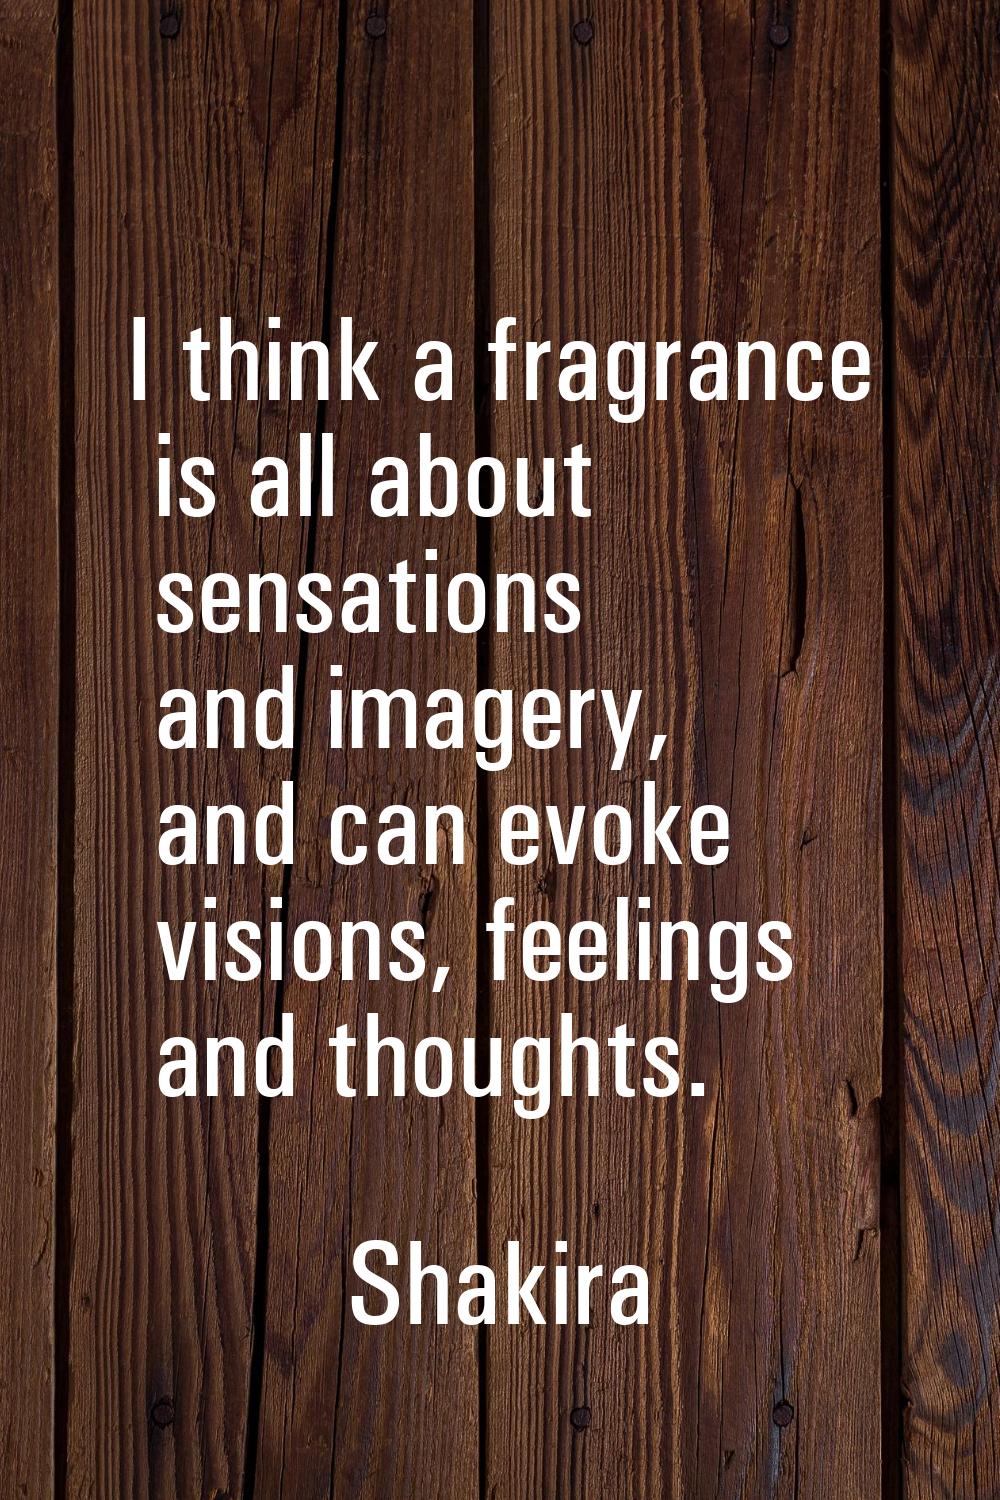 I think a fragrance is all about sensations and imagery, and can evoke visions, feelings and though